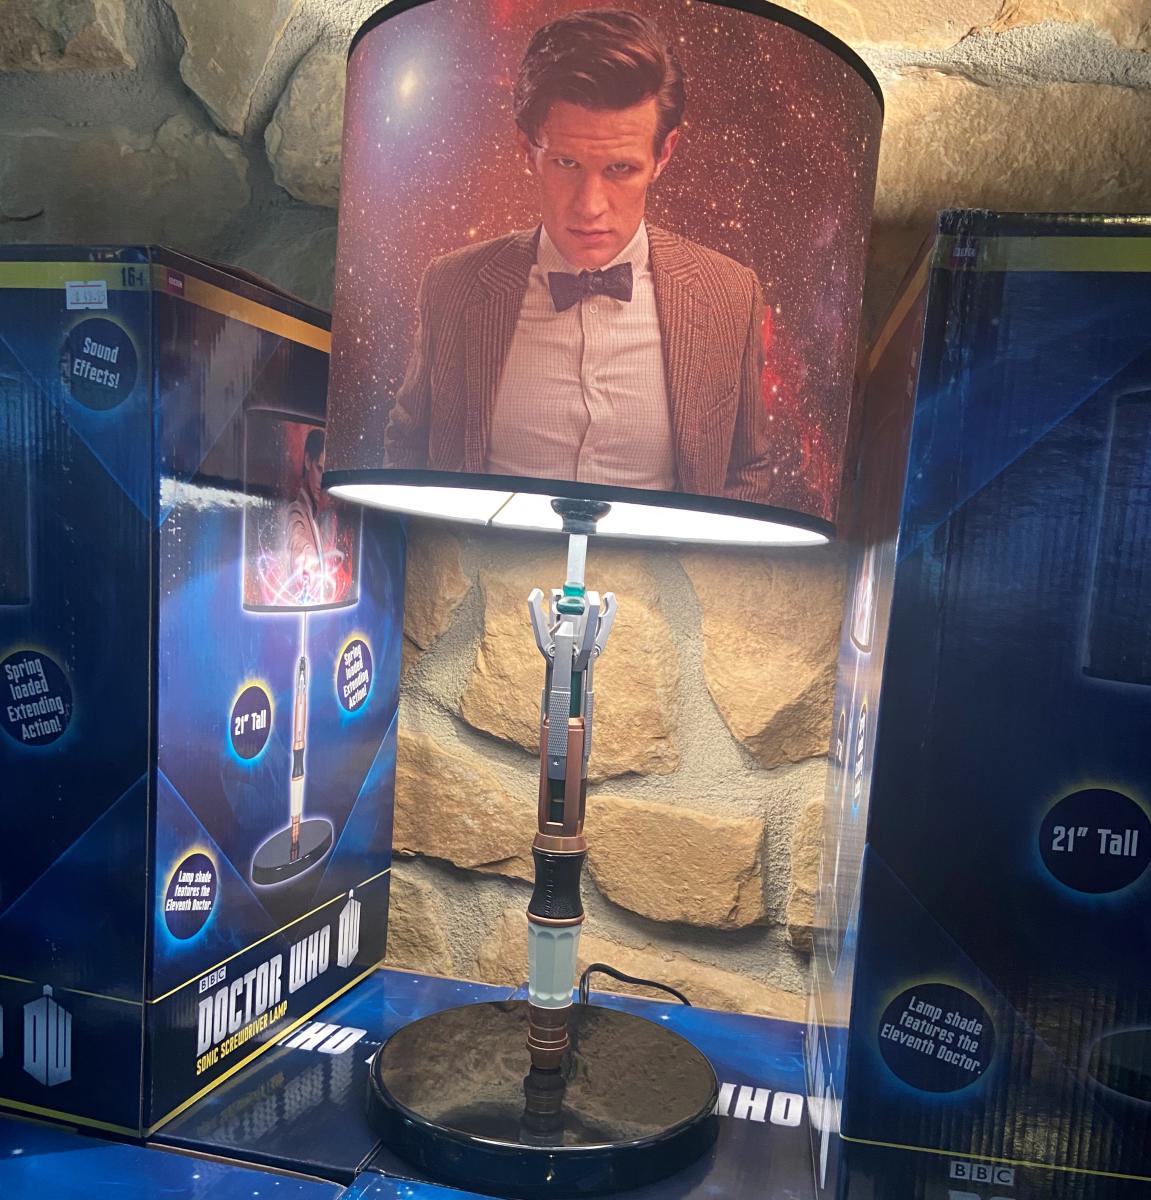 Dr. Who Lamp